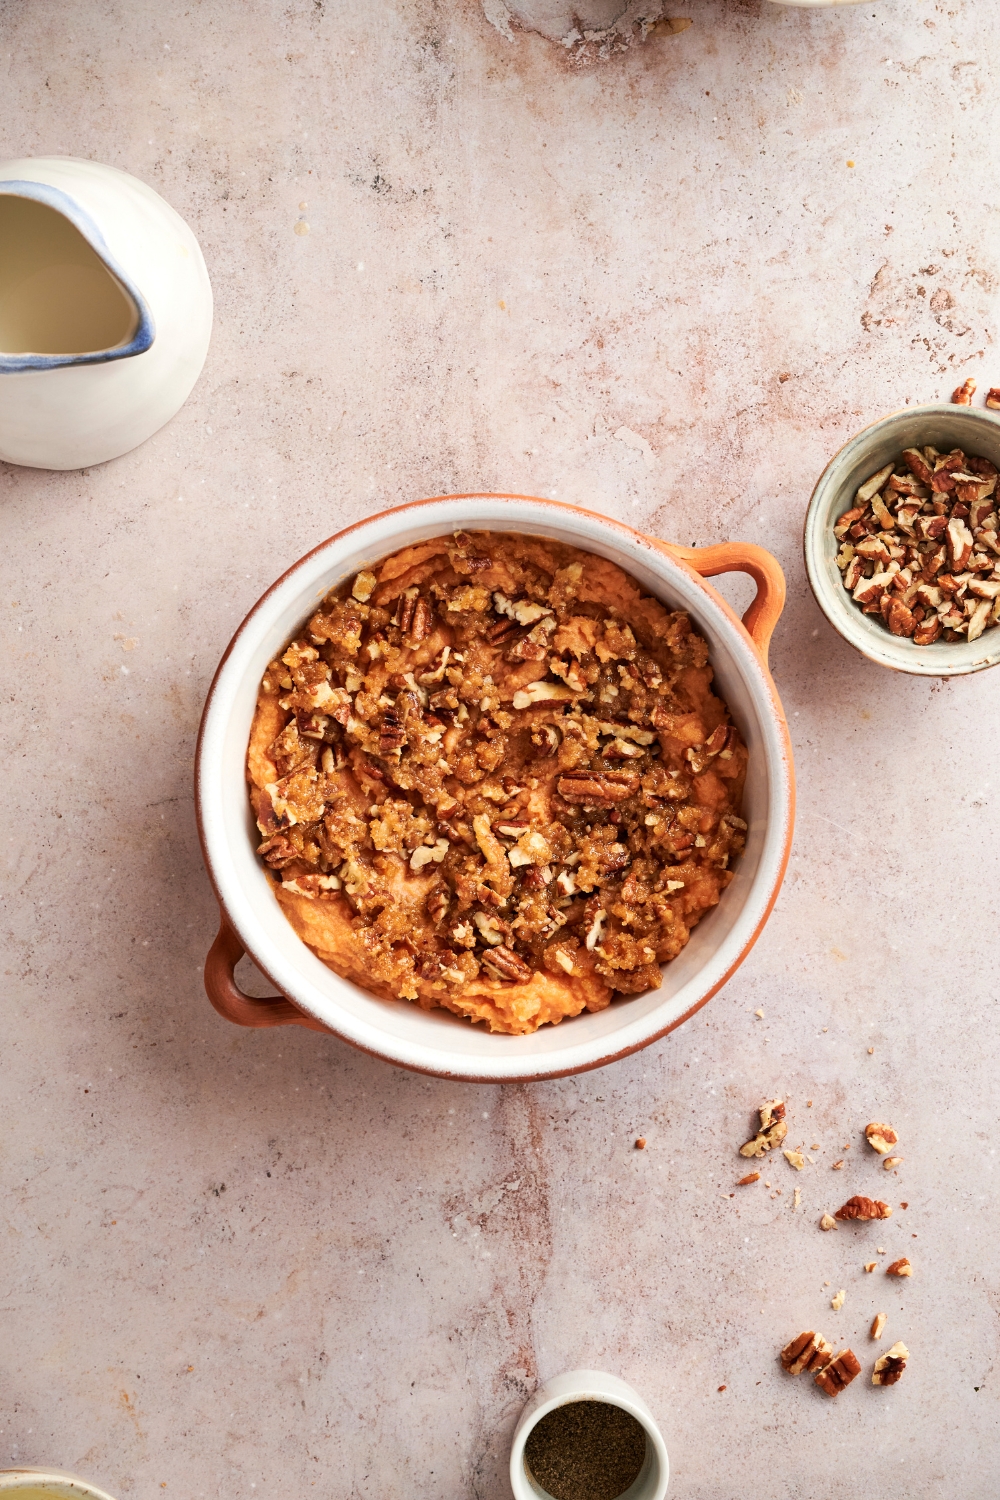 A white pot full of sweet potato casserole is on a gray counter. The casserole is topped with golden brown pecan topping.